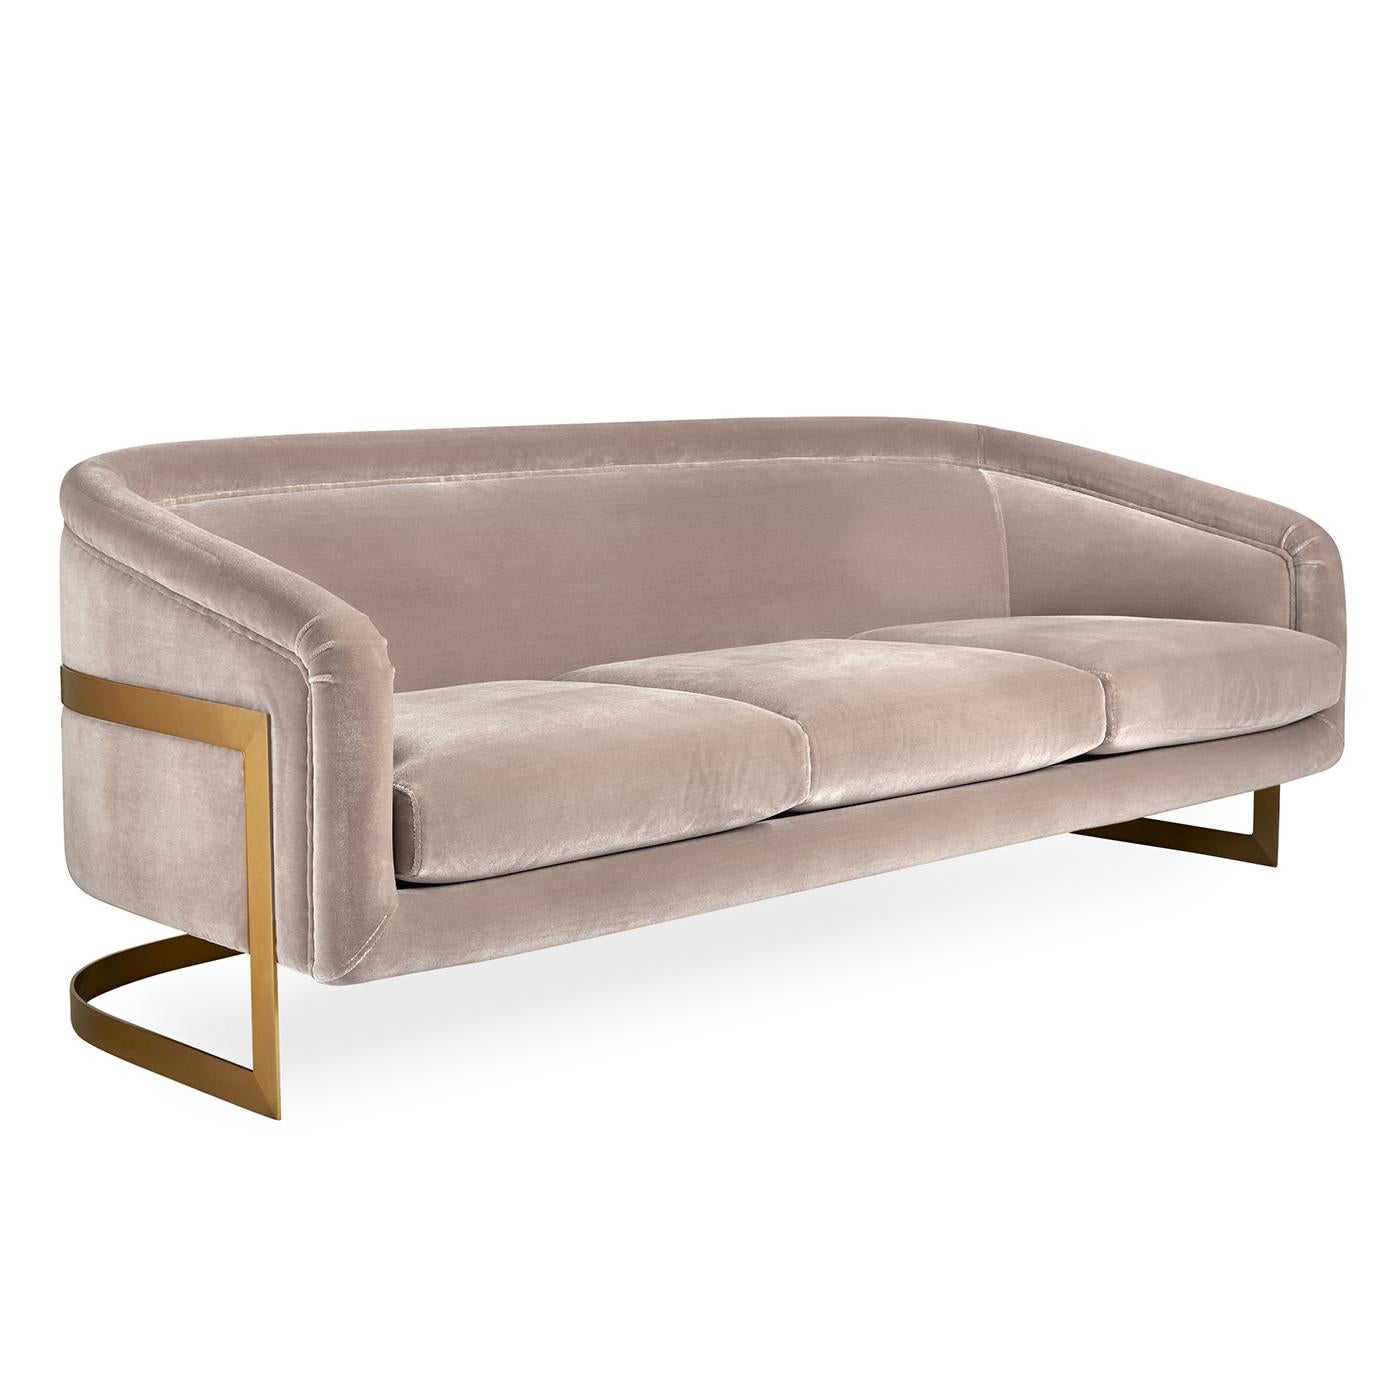 Louche Glamour. Think Halston, think Studio 54, think sybaritic style. Also think our signature Bacharach details, generously scaled for even more comfort. Featuring curved metal supports and fluid modern forms, this sofa is très chic from every